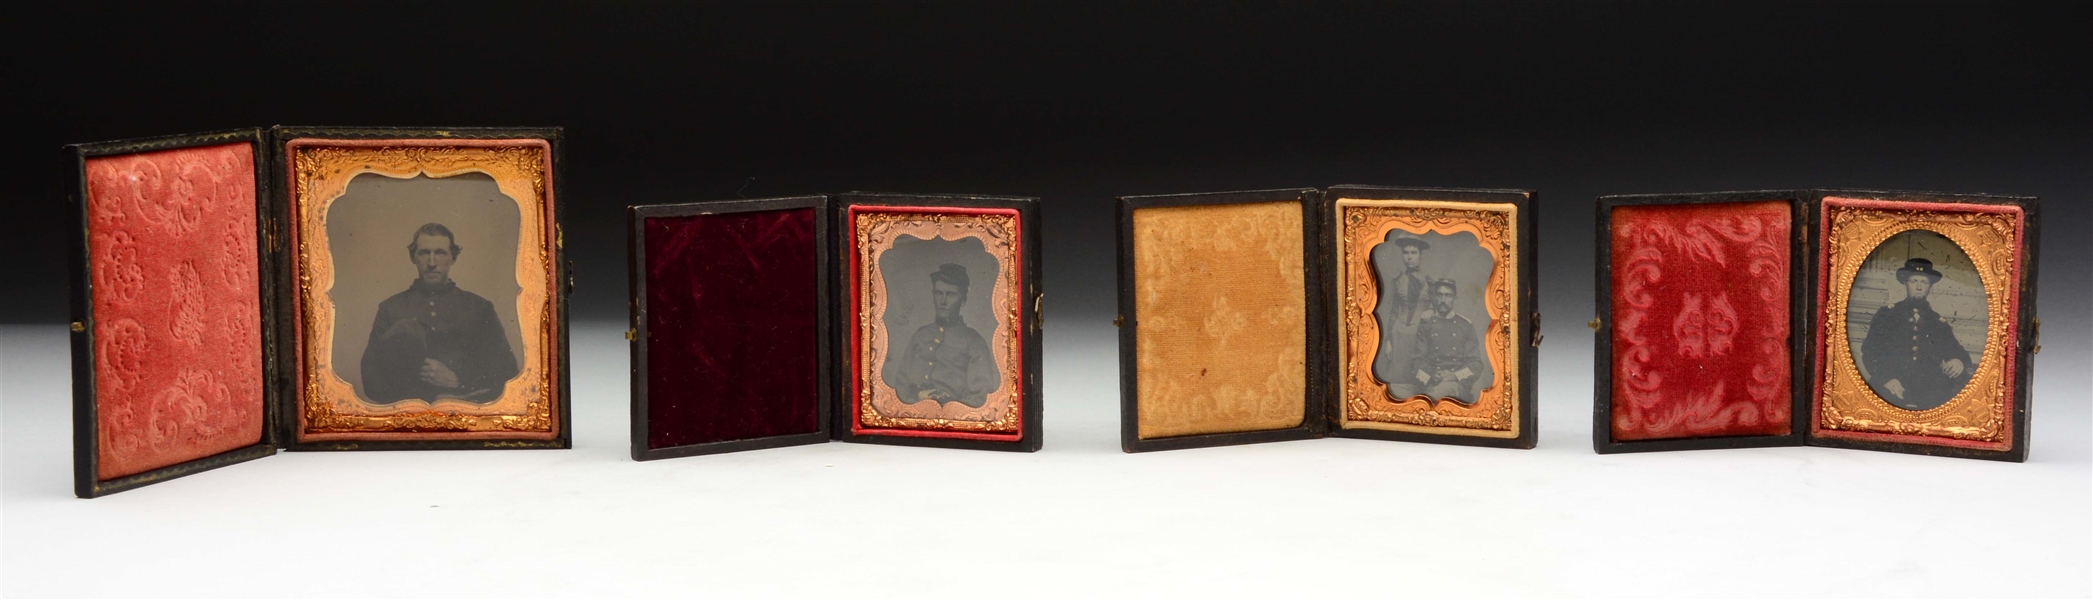 LOT OF 4: CIVIL WAR SOLDIER PHOTOGRAPHS IN CASES. 